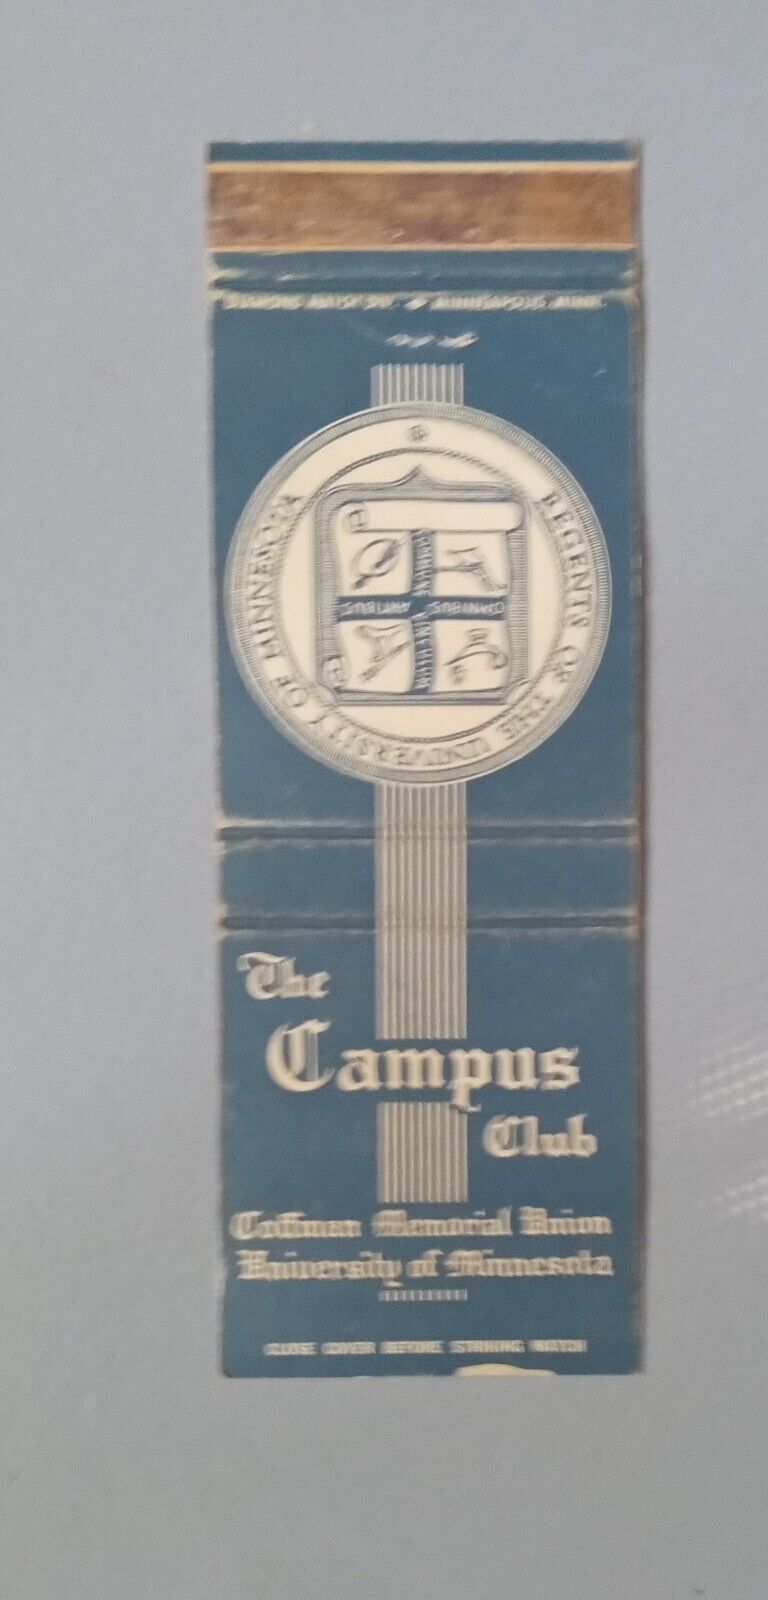 The Campus Club University Of Minnesota Matchbook Cover